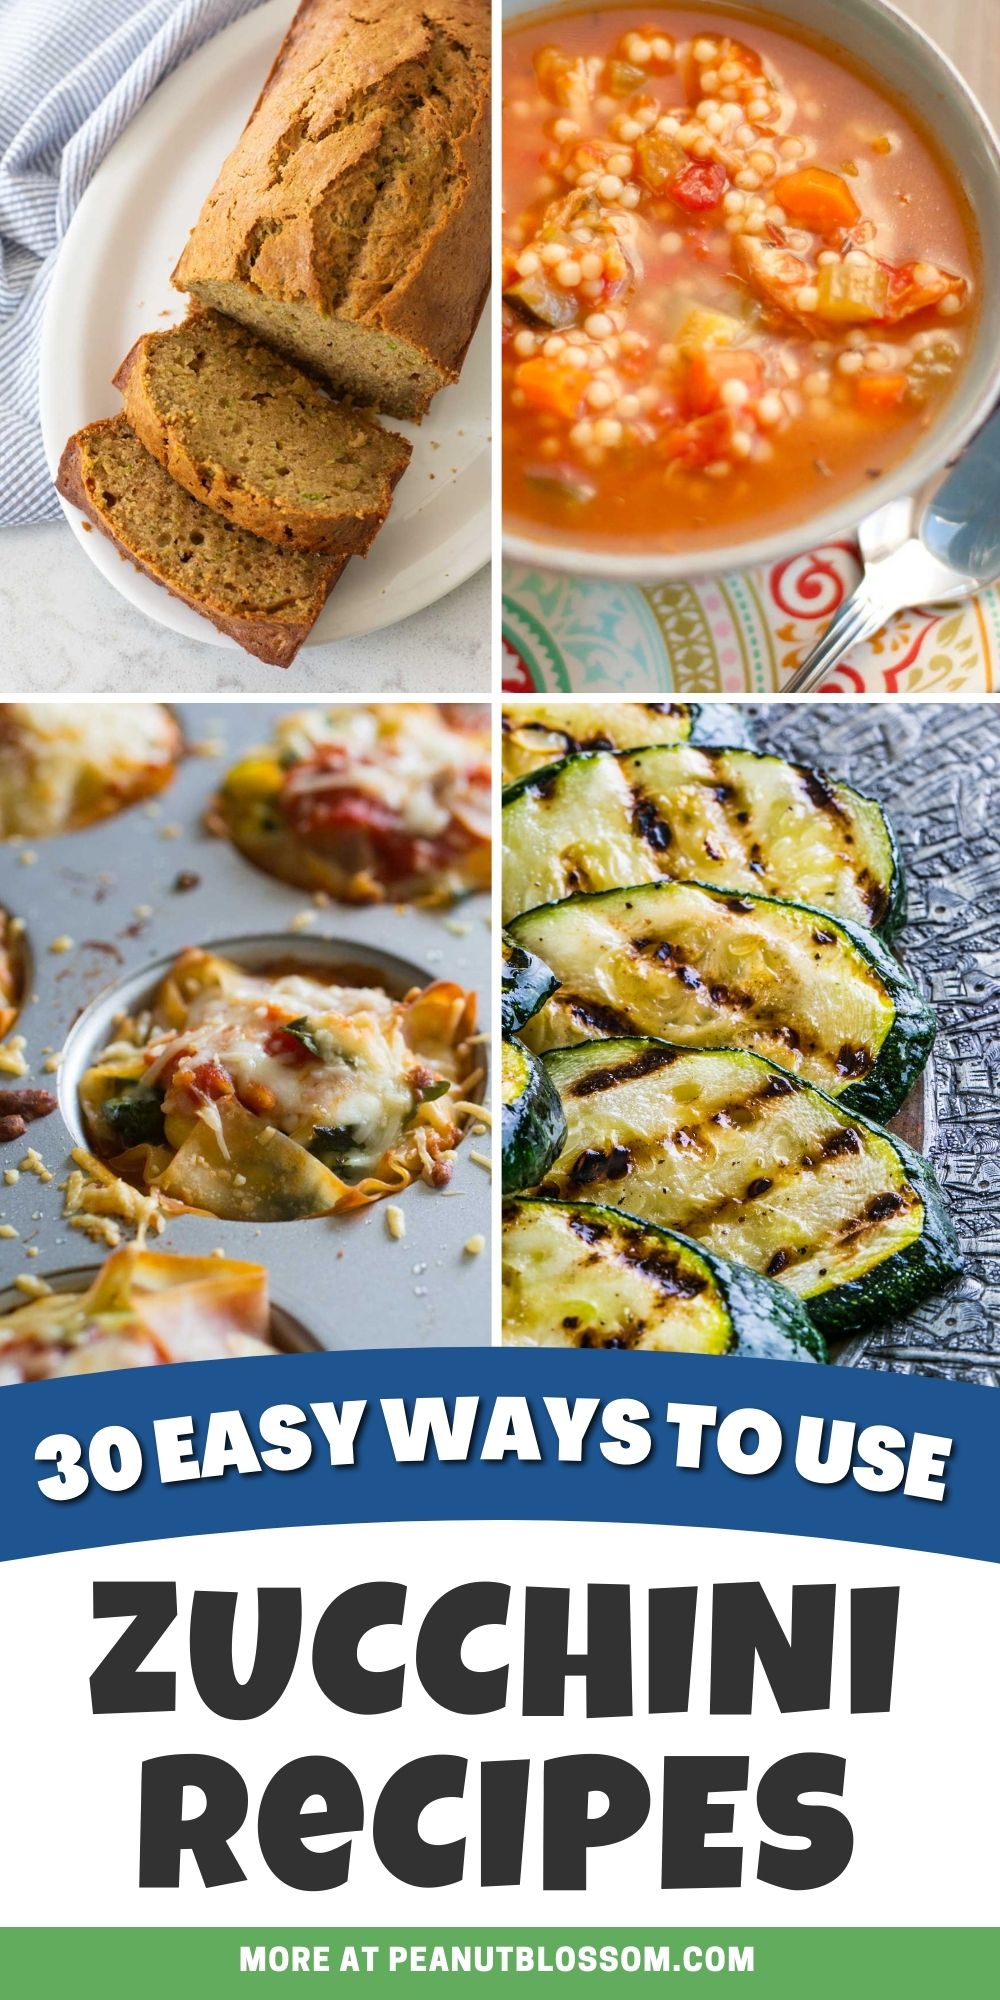 A photo collage shows several of the best zucchini recipes.